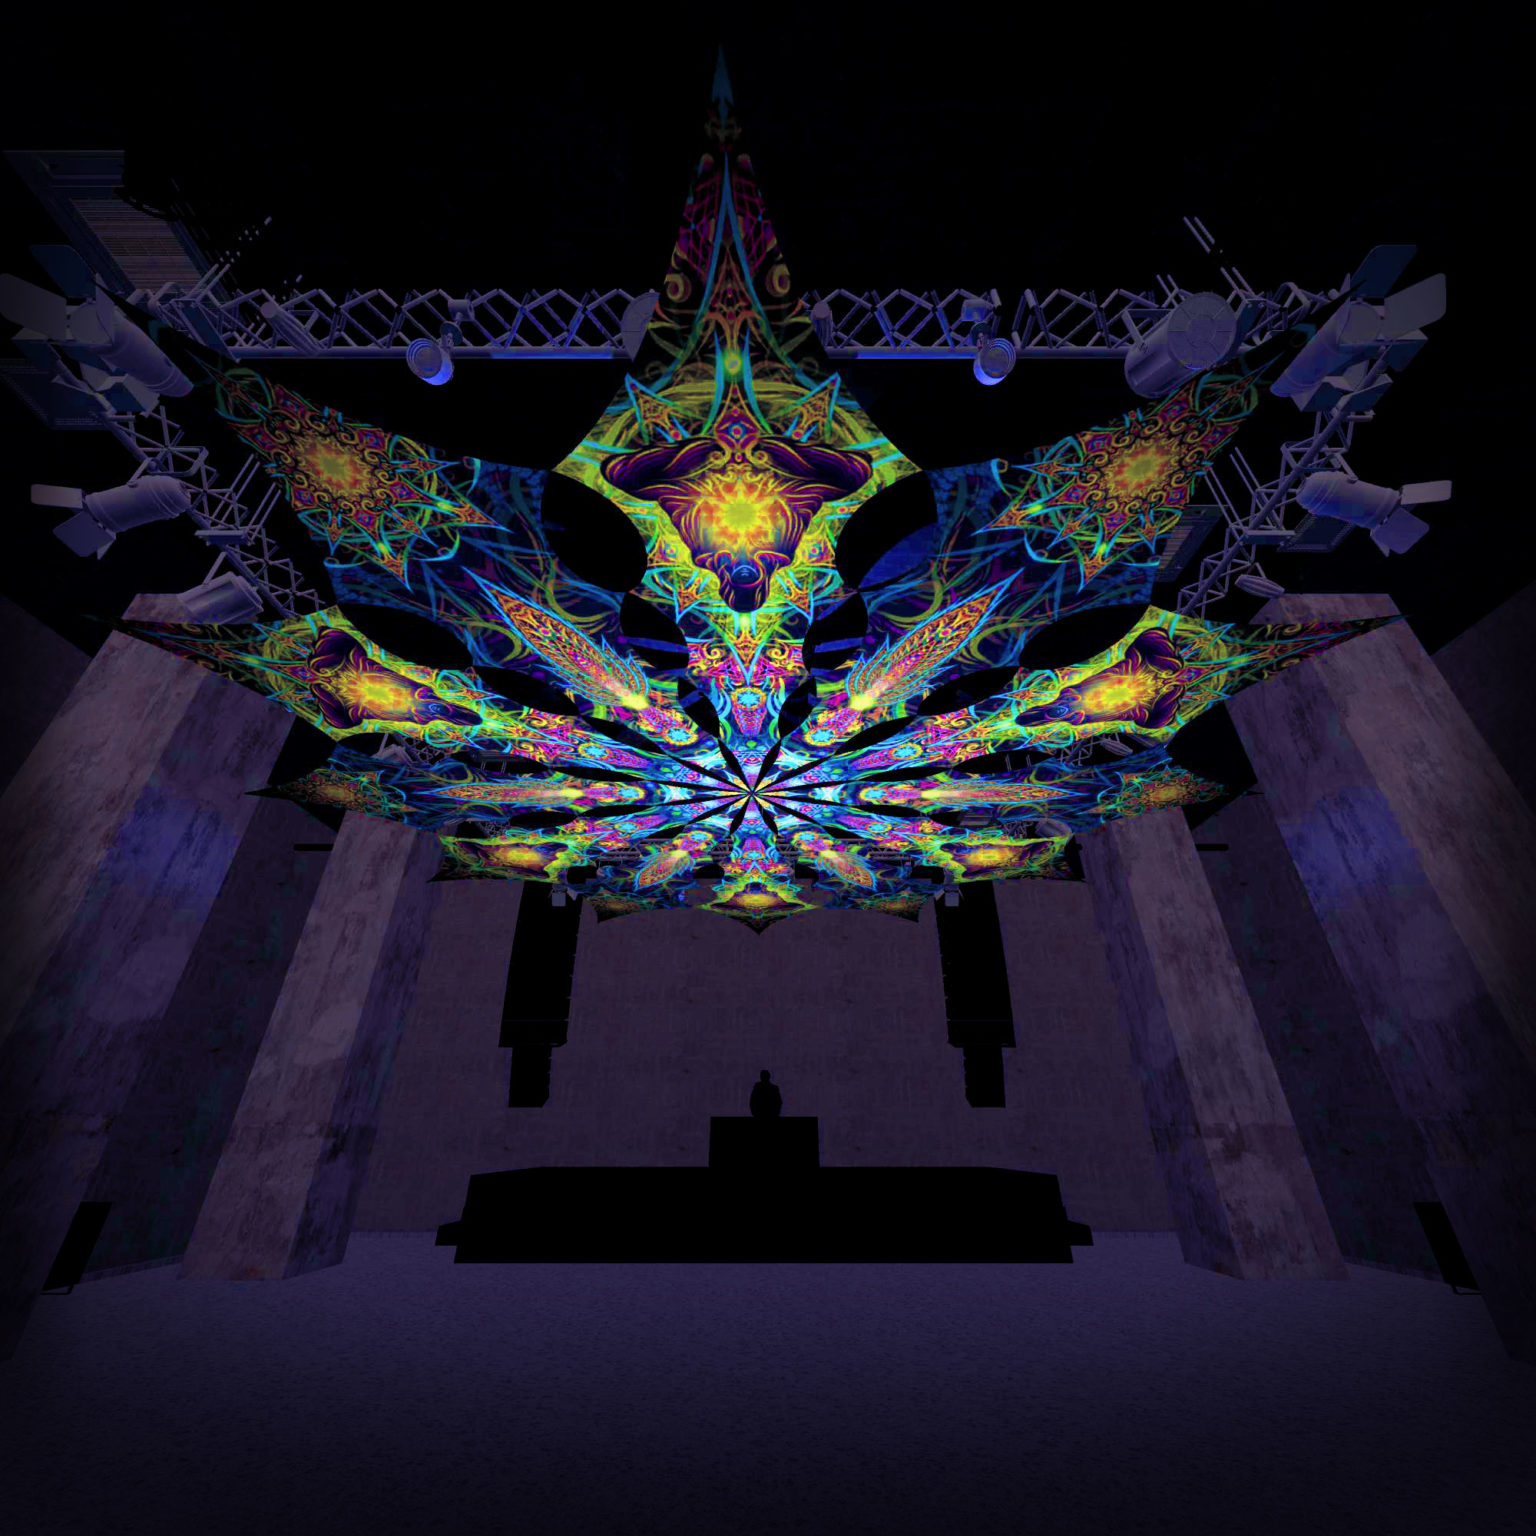 Reincarnation 2 - Star&Adept -Psychedelic UV Canopy - 12 petals set - Large Size 11m diameter -3D-Preview in a club